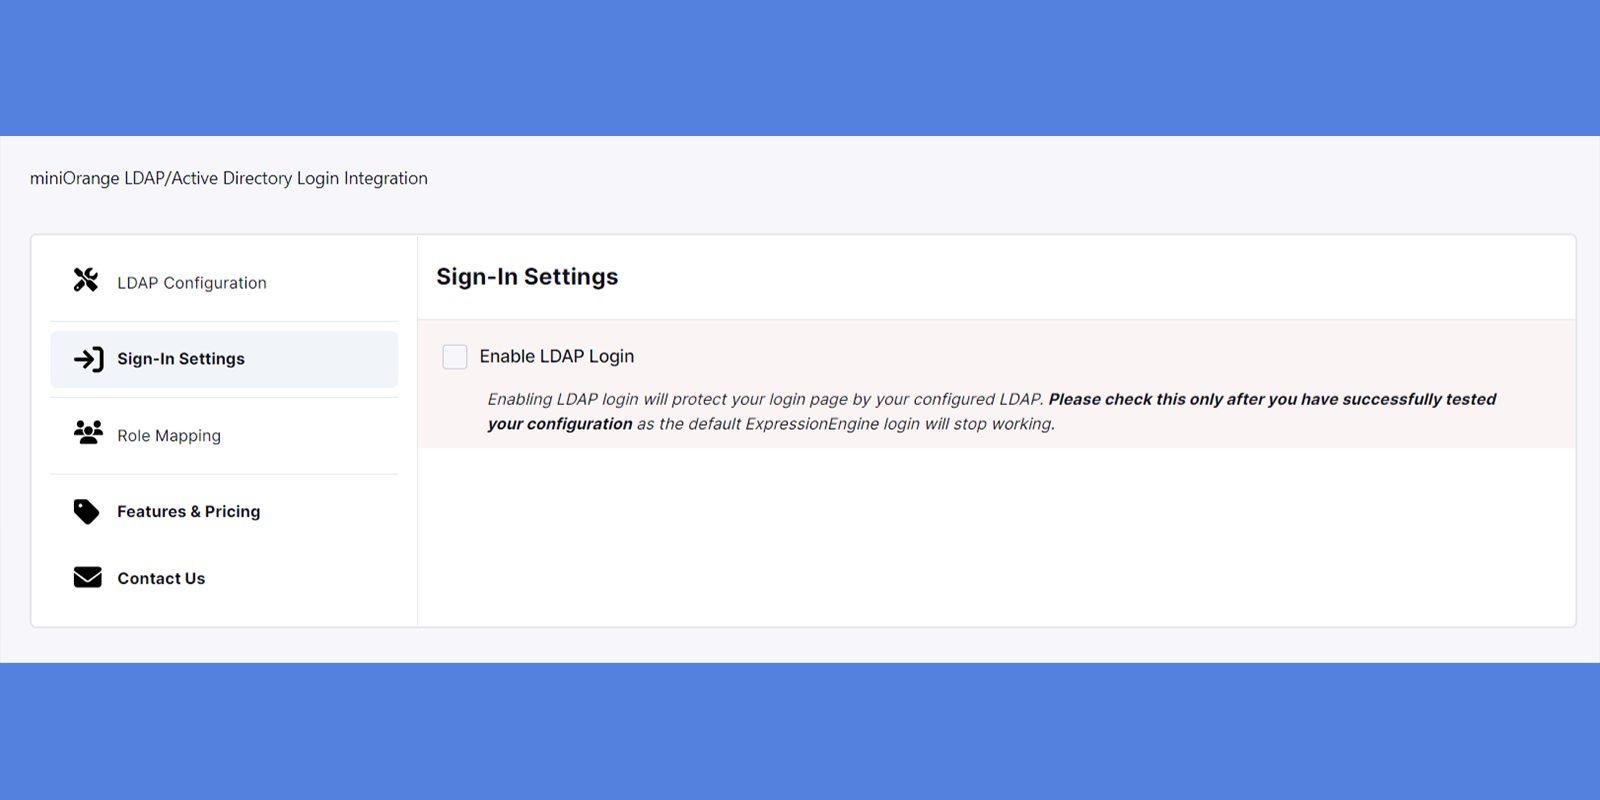 Sign-in Settings